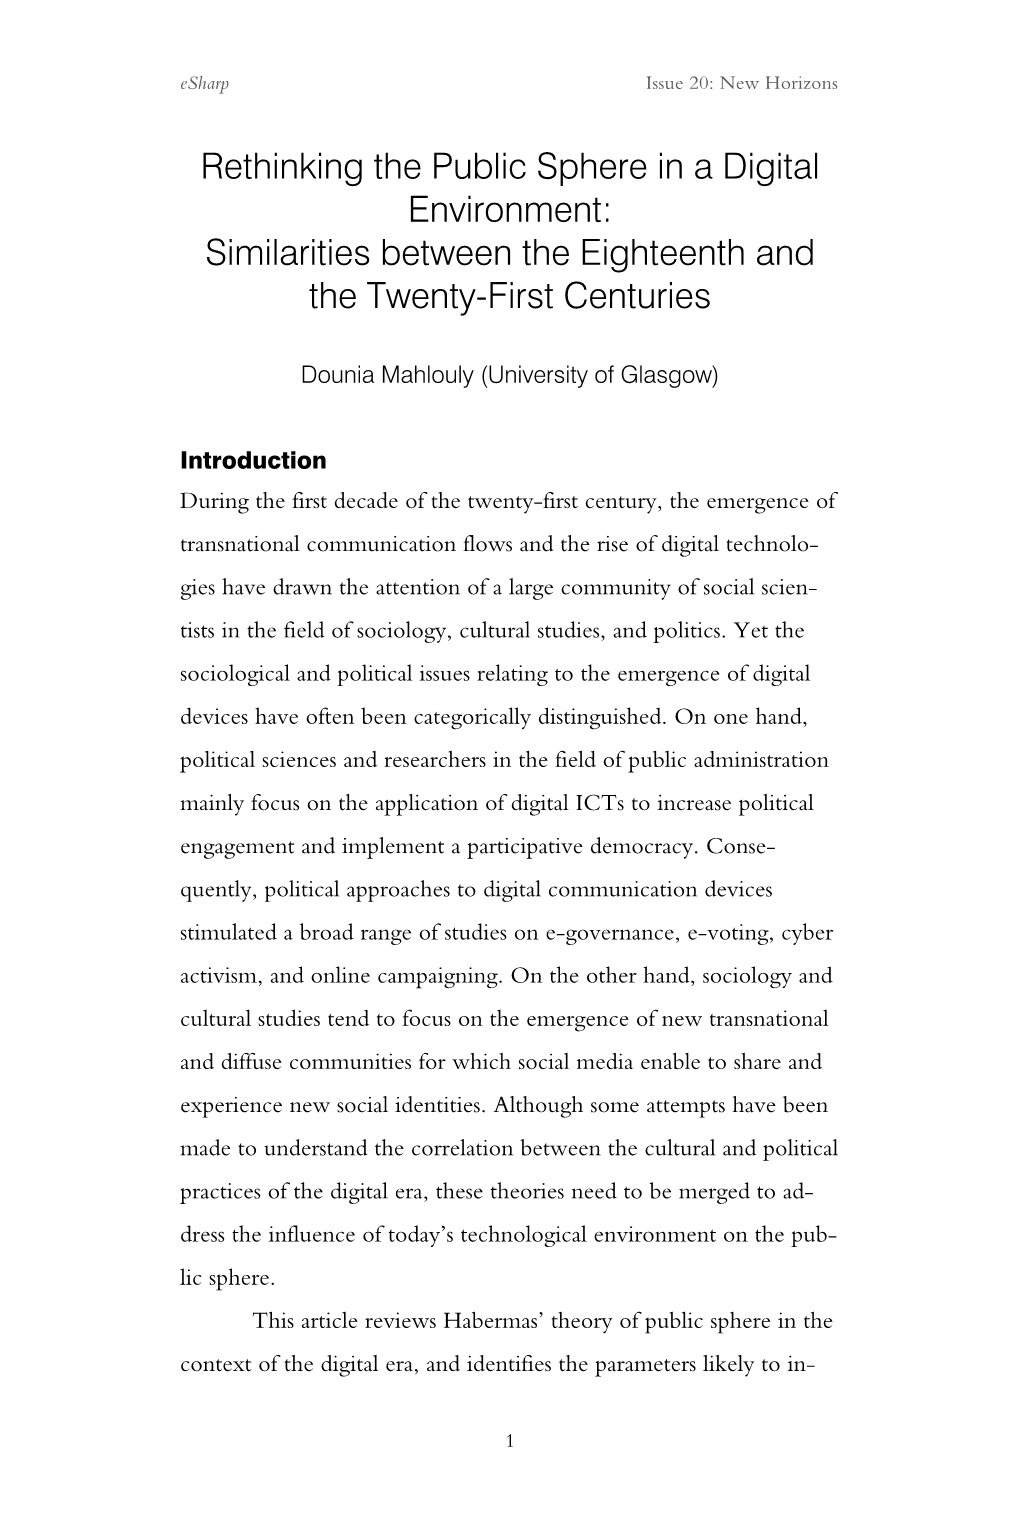 Rethinking the Public Sphere in a Digital Environment: Similarities Between the Eighteenth and the Twenty-First Centuries